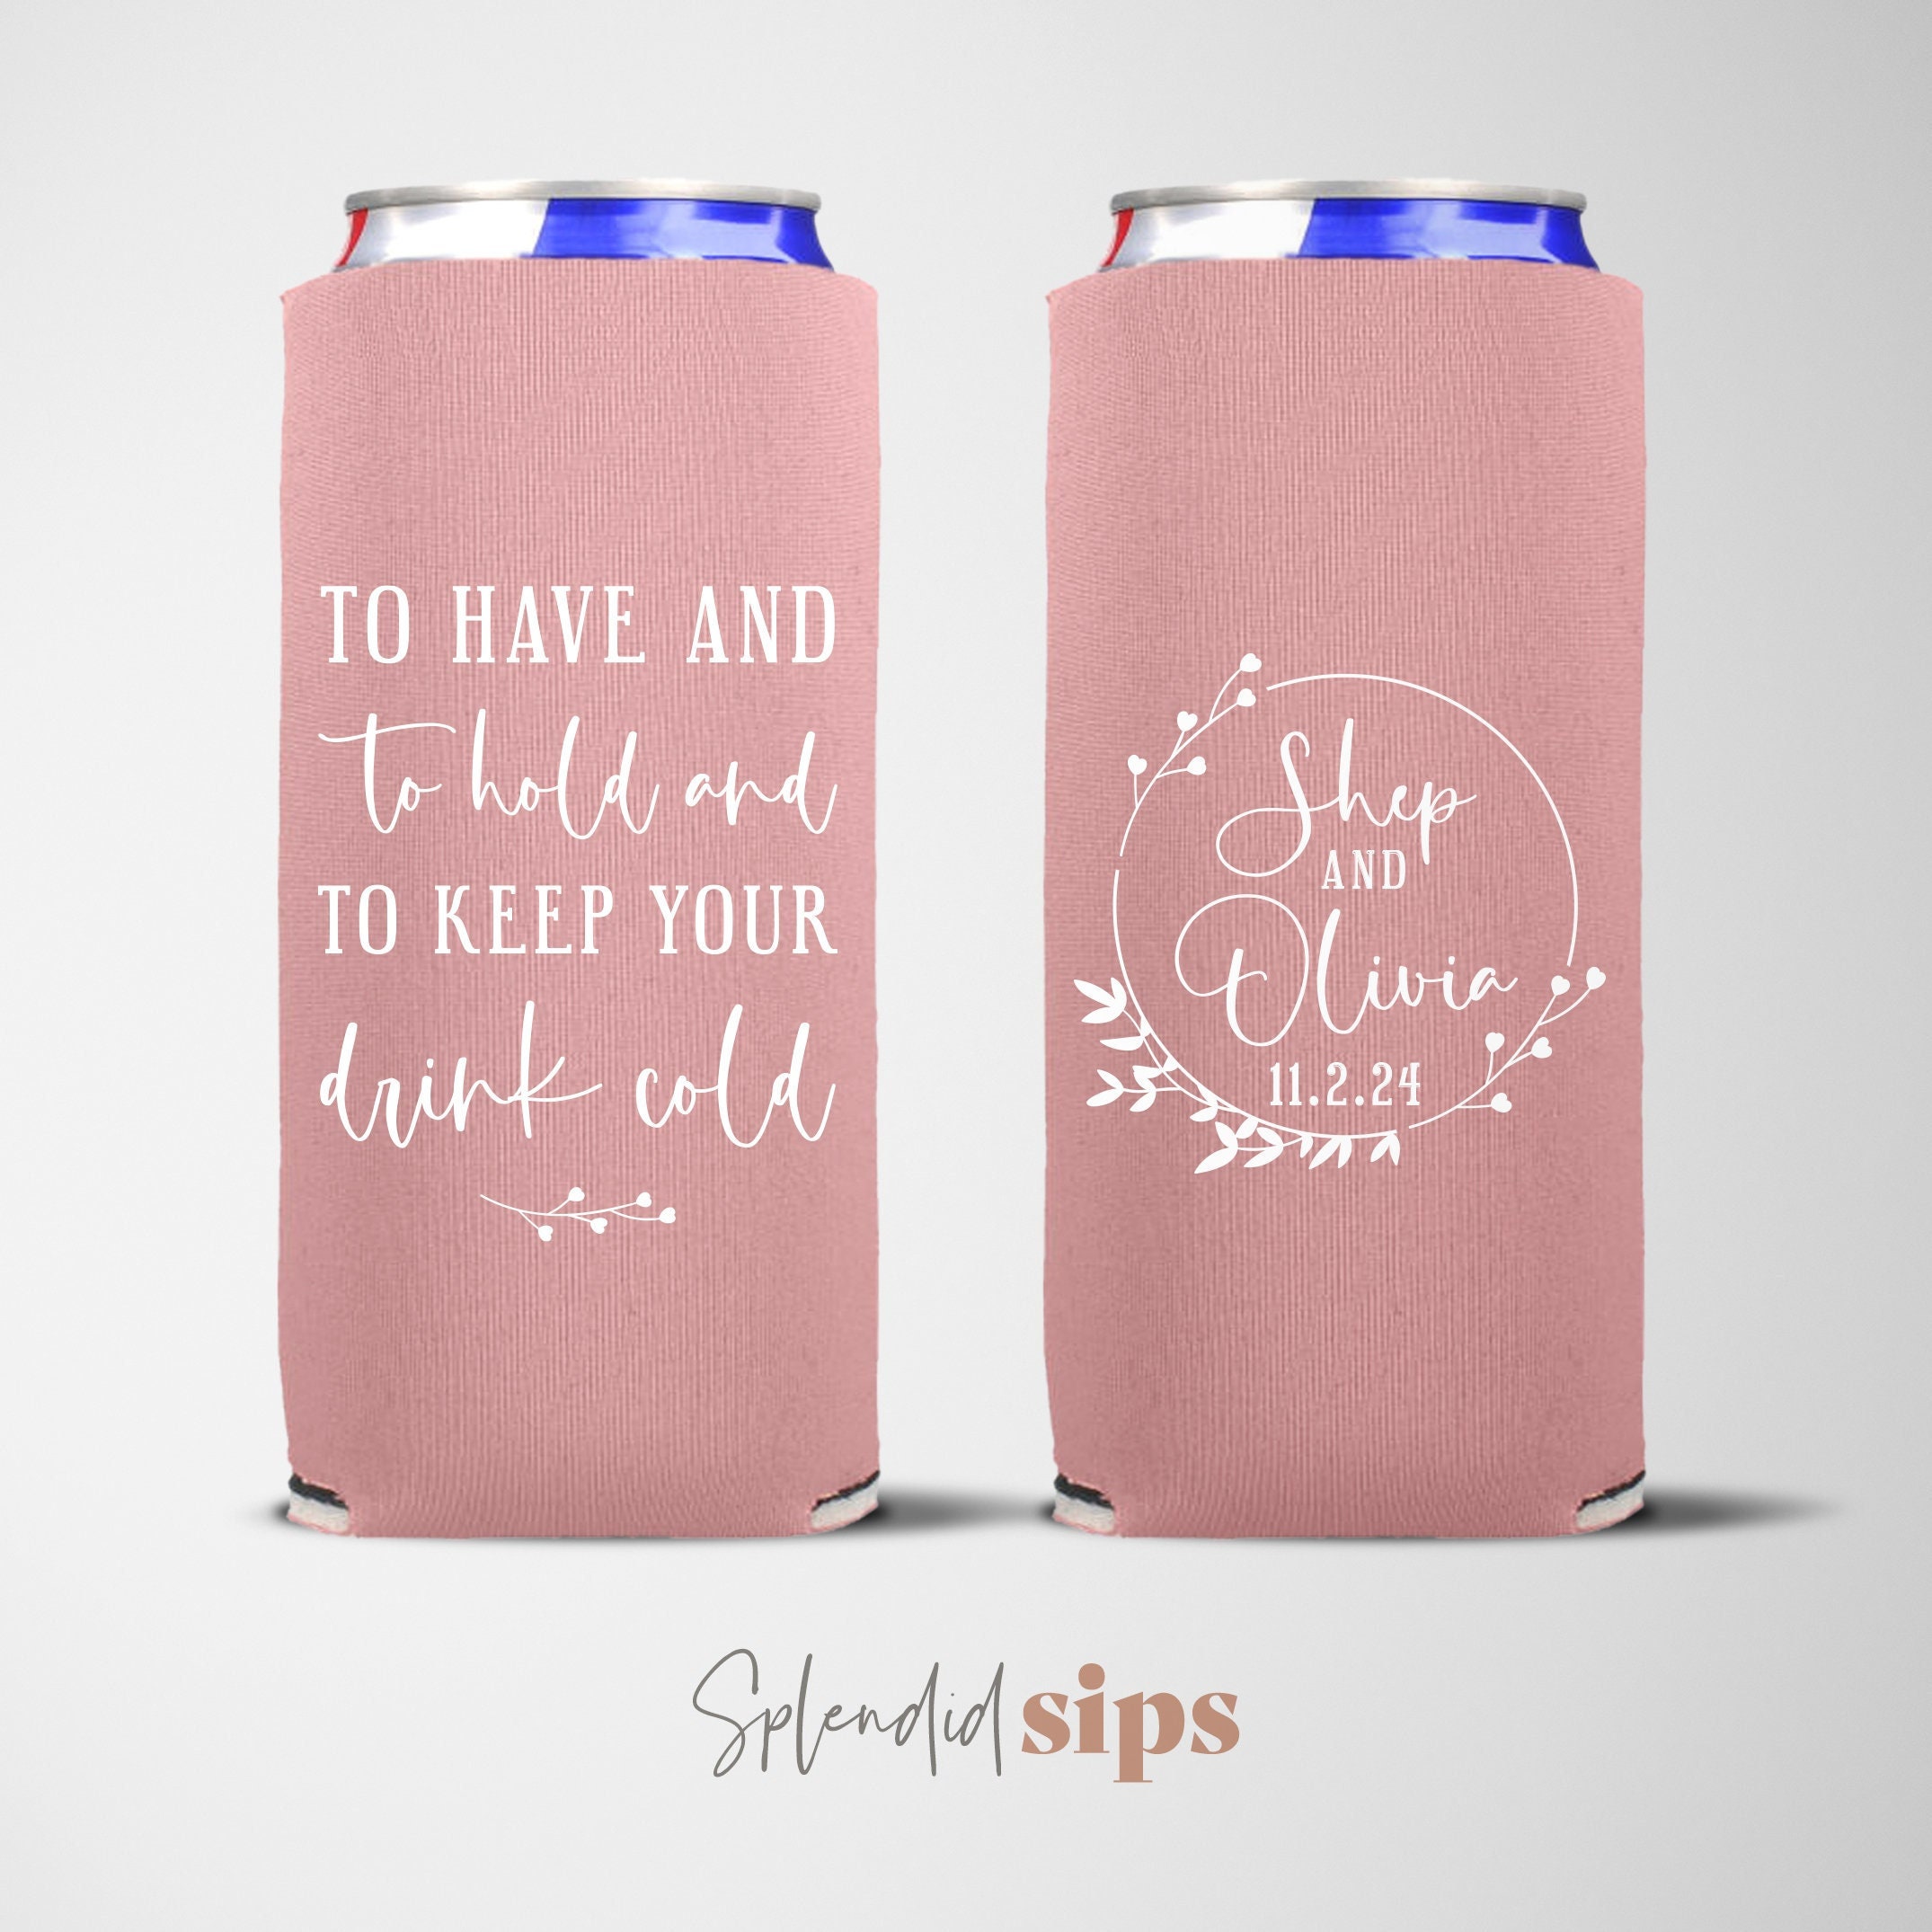 GO ASK YOUR DAD Collapsible Seltzer Koozie